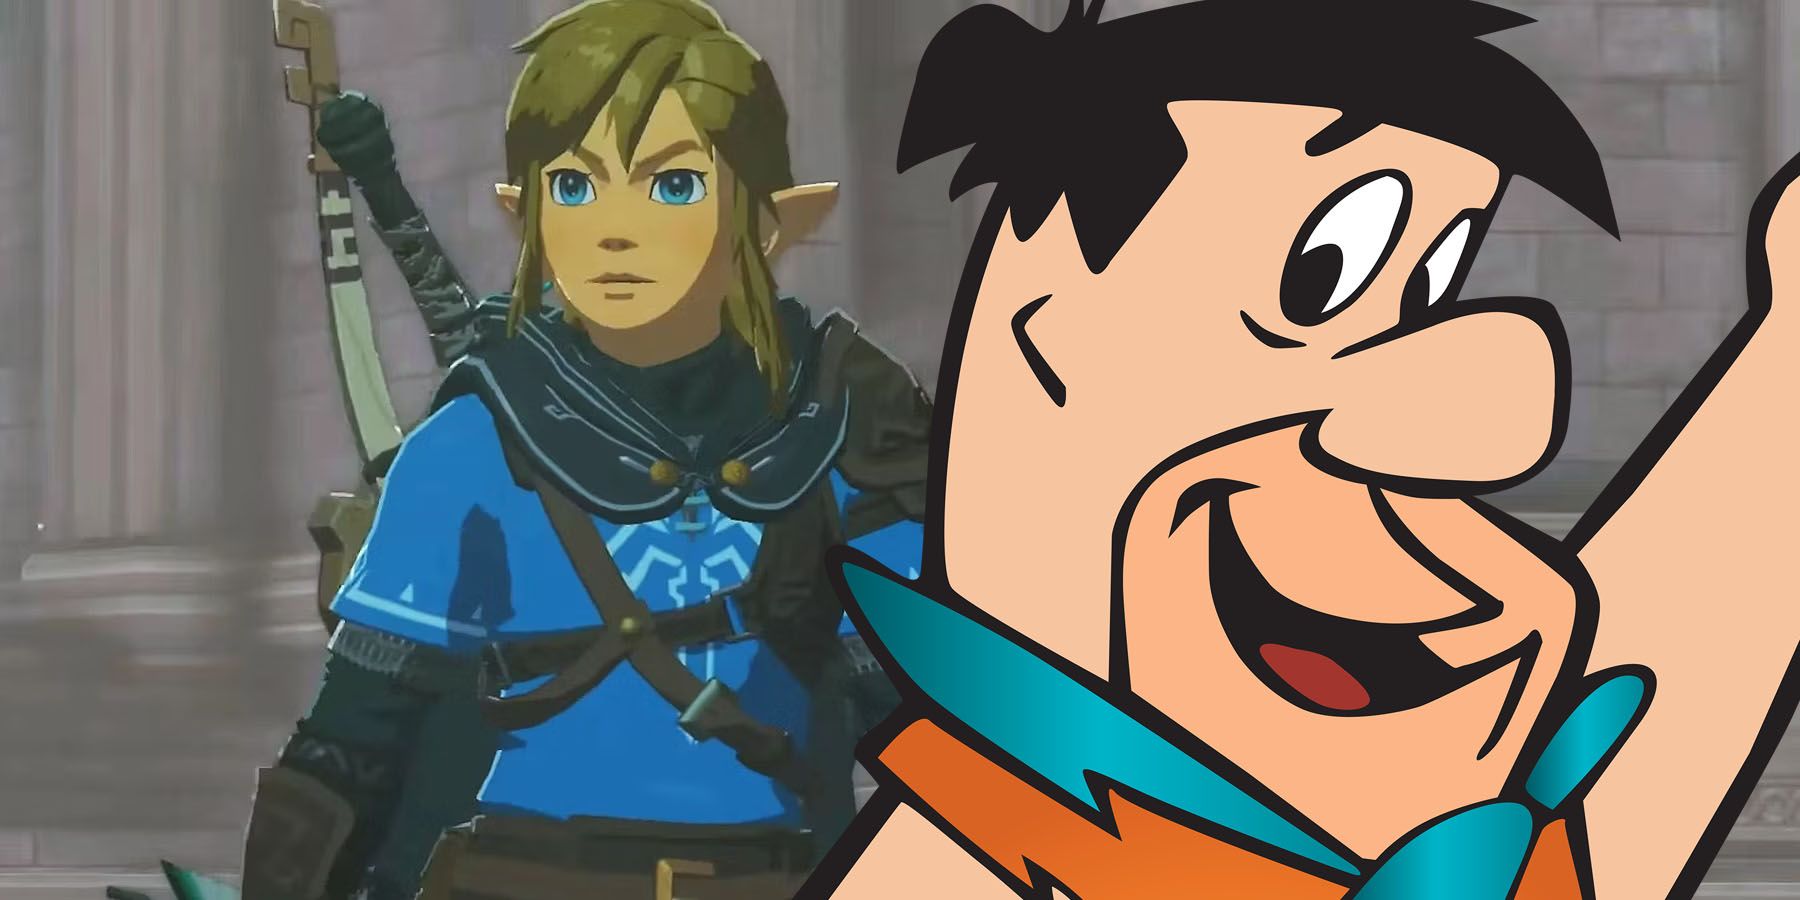 A screenshot of Link from Zelda: Tears of the Kingdom with Fred Flintstone inserted next to him.